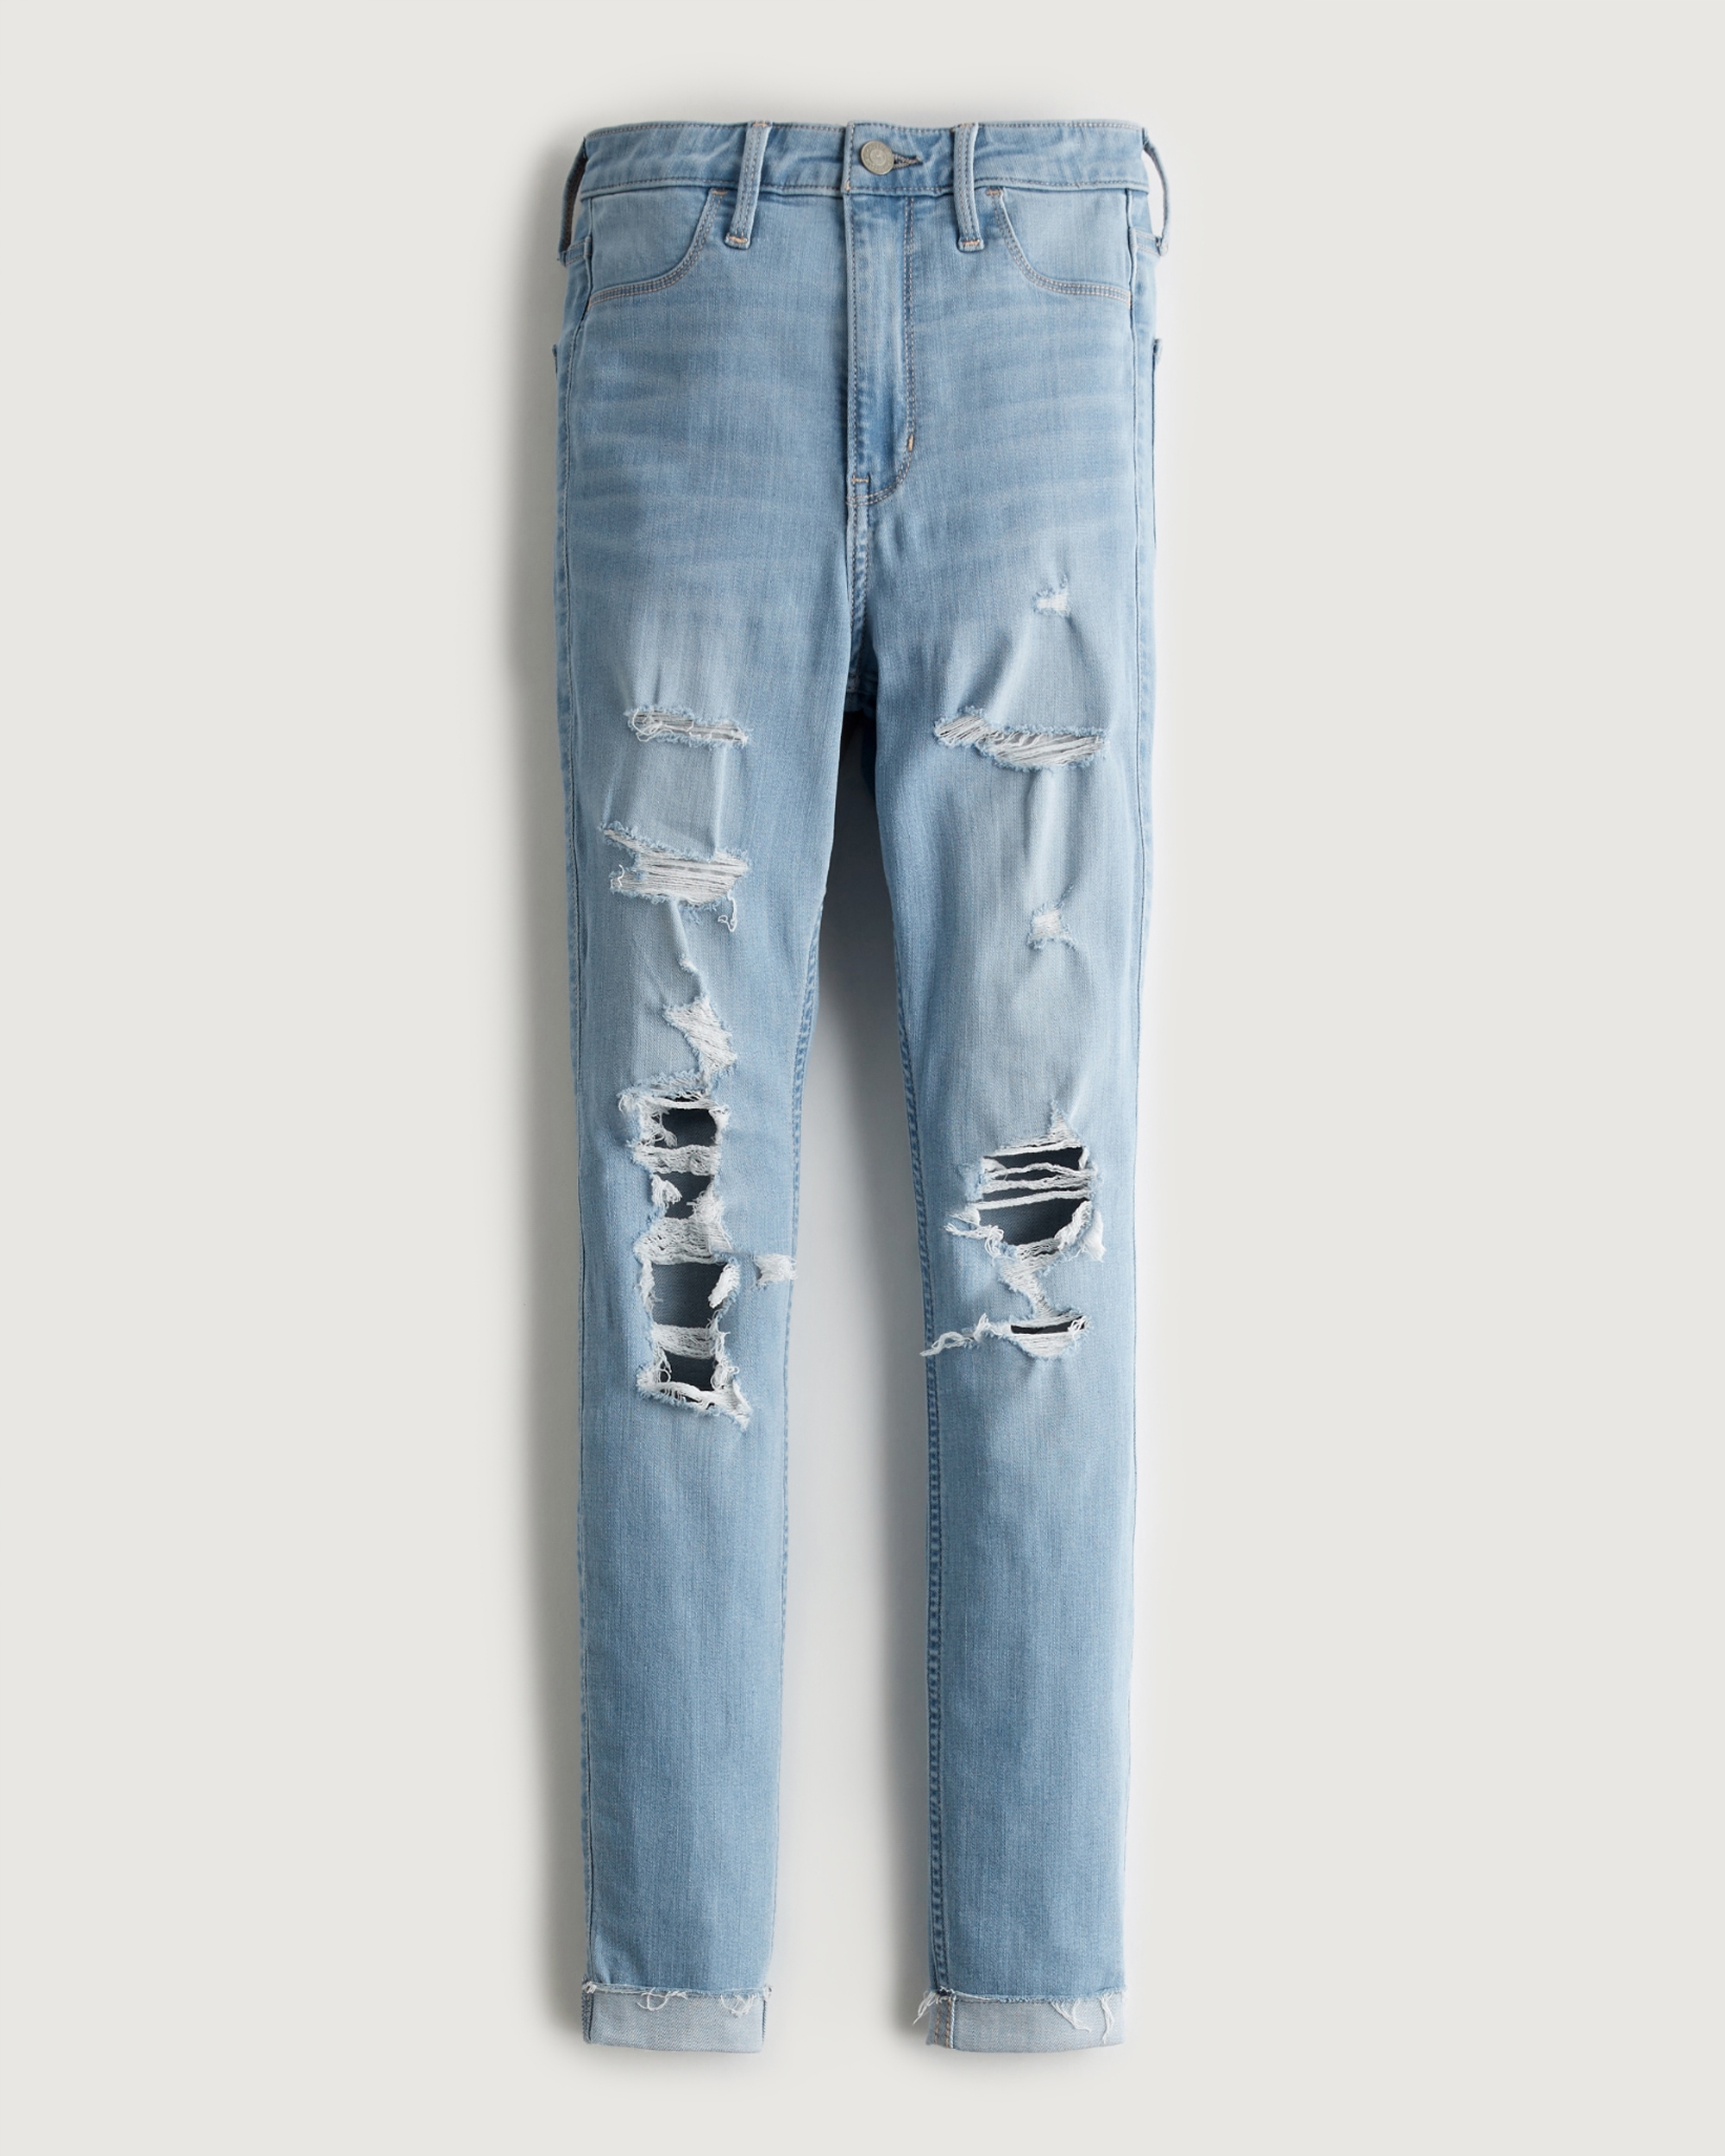 hollister ripped jeans front and back